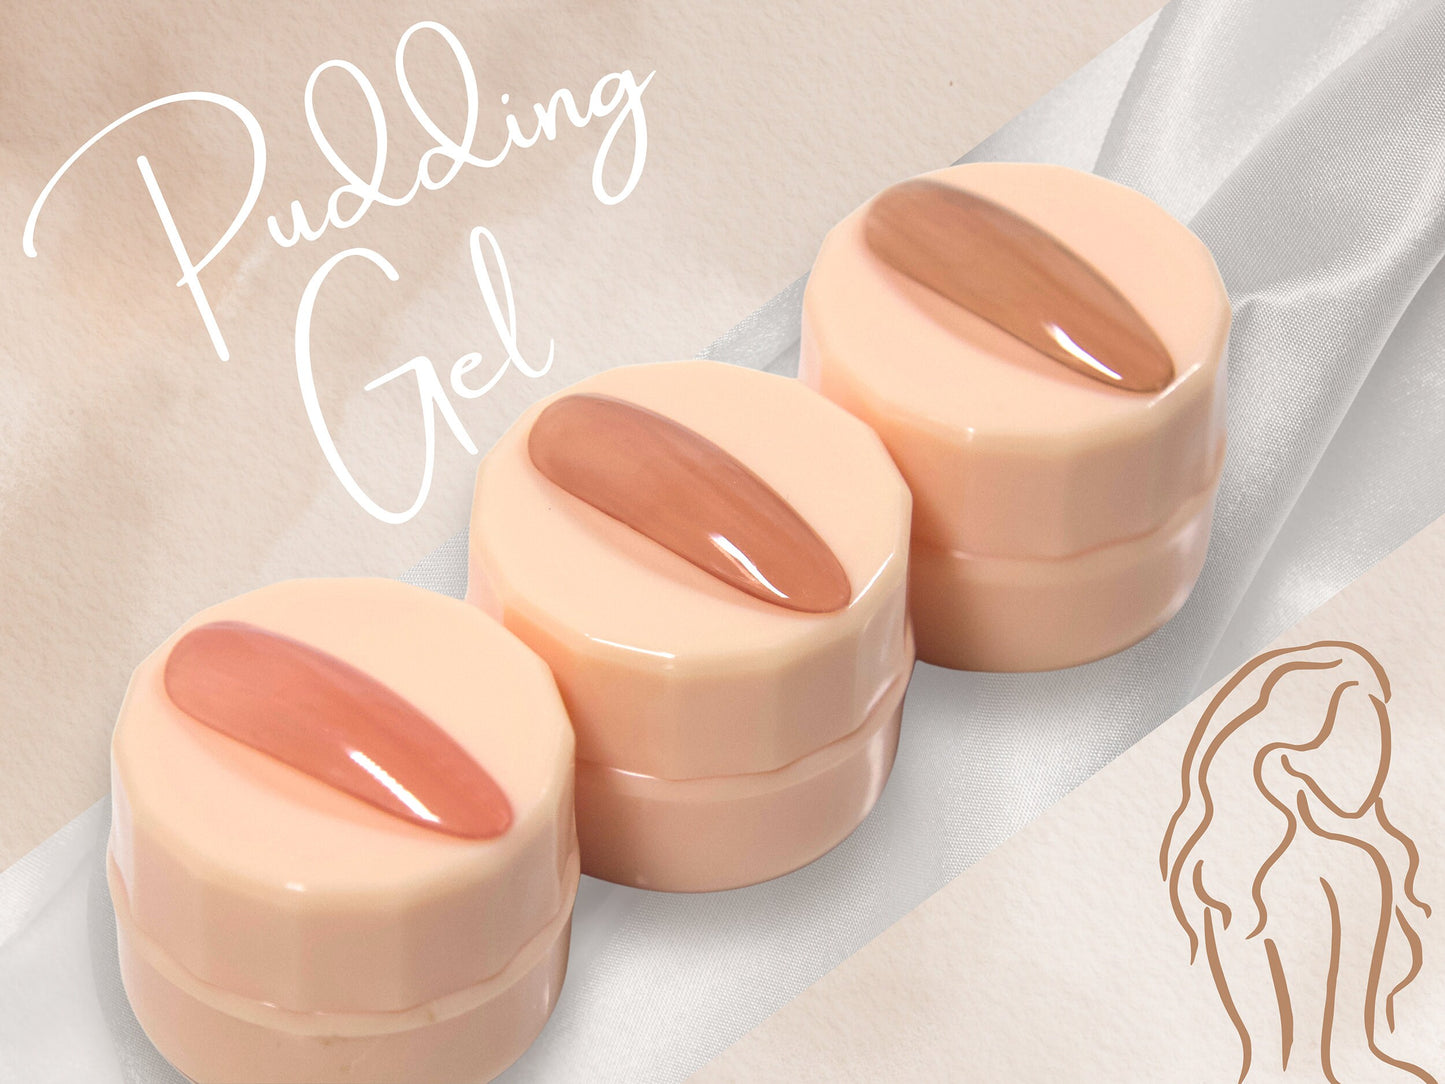 3pcs Solid Jelly UV Gel Nail Art /Translucent Nude suit Gel Polish/ Amber Rose Nudy Brown Pudding UV Gels Creamy Gel Manicure Pedicure